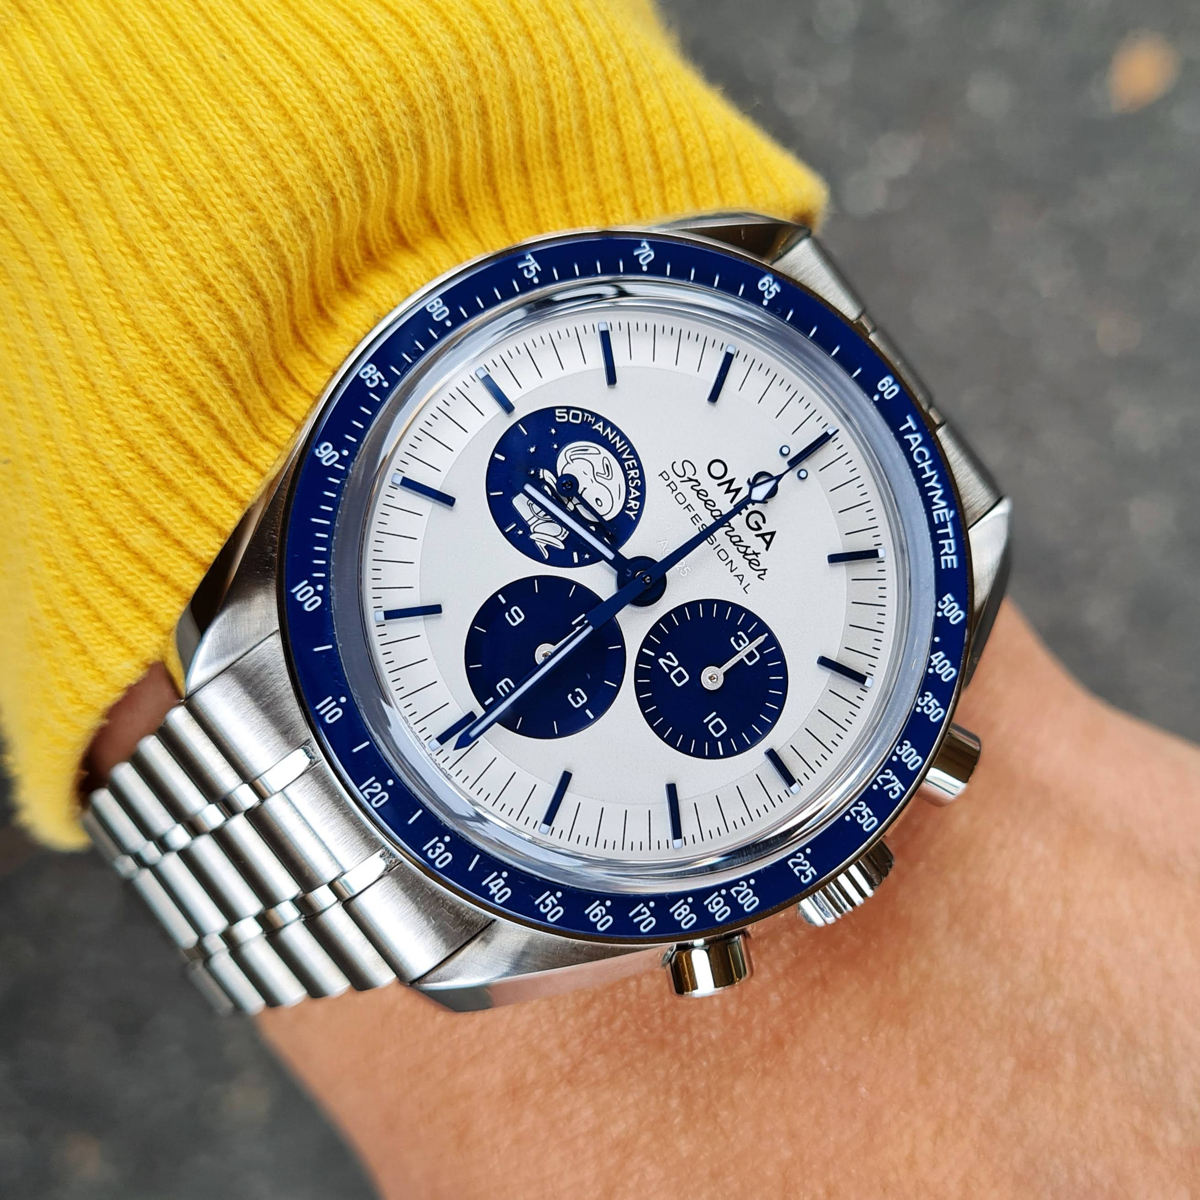 Owner Review: Omega Speedmaster “Silver Snoopy Award”